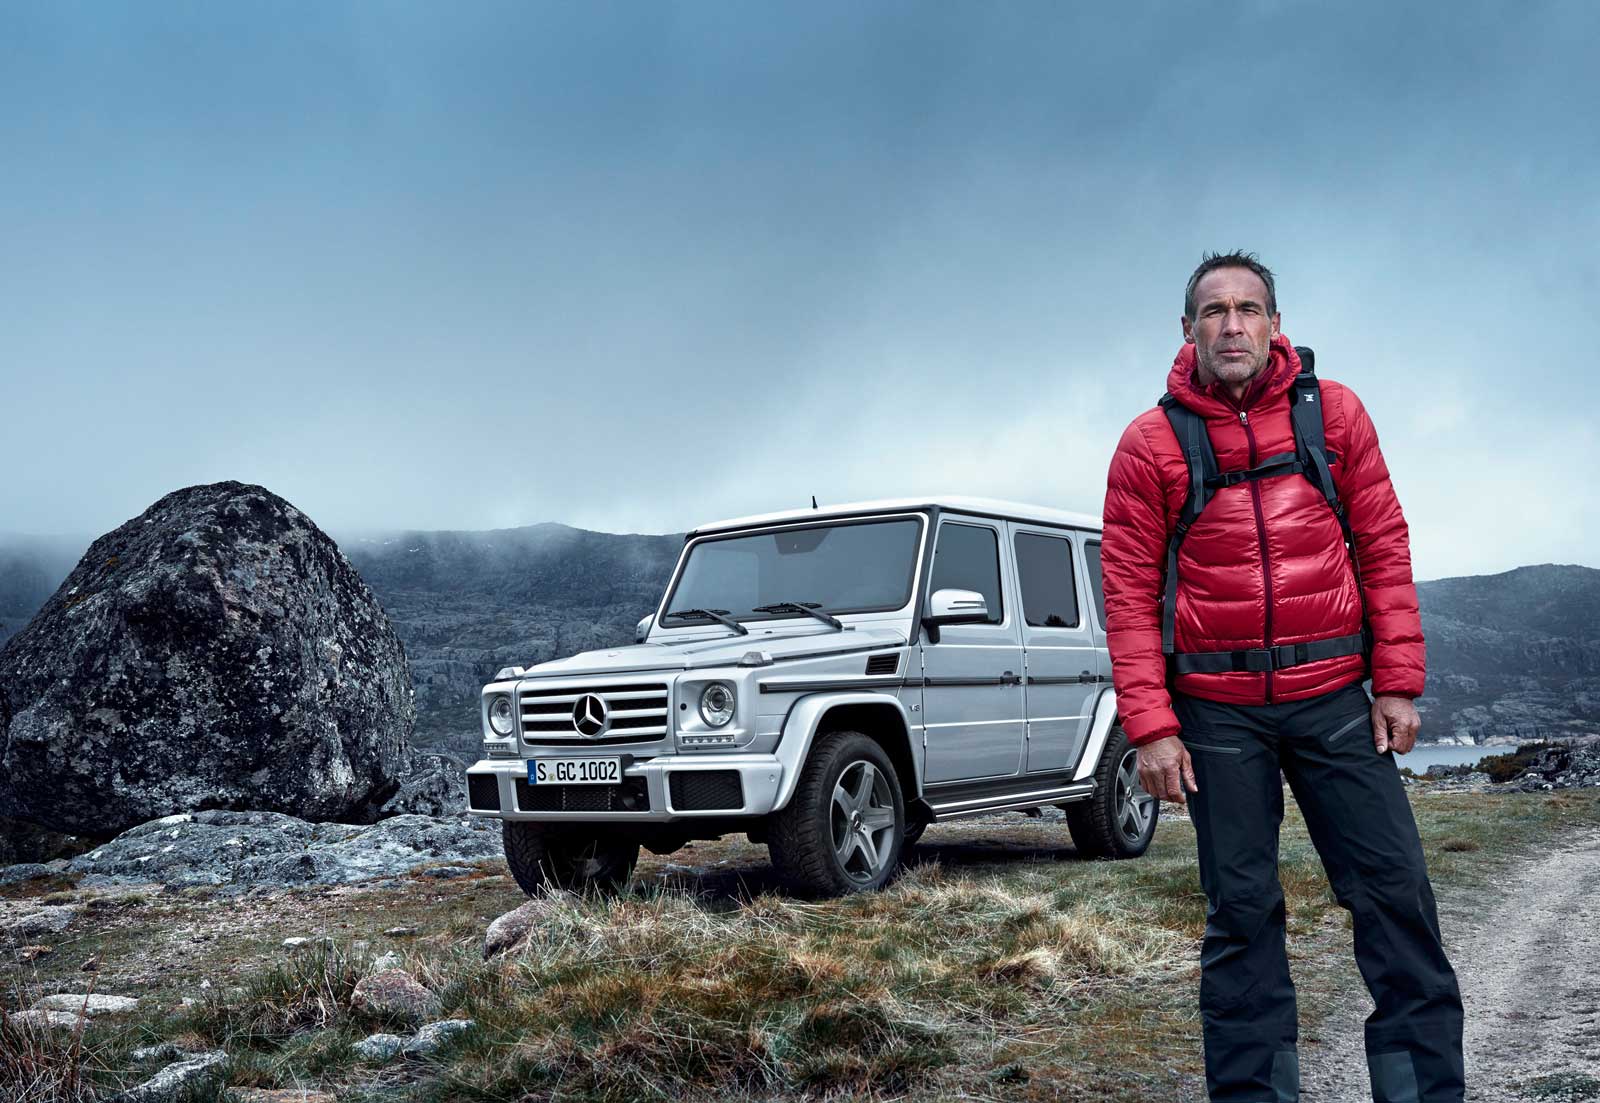 Adventurer Mike Horn posing with the G-Class